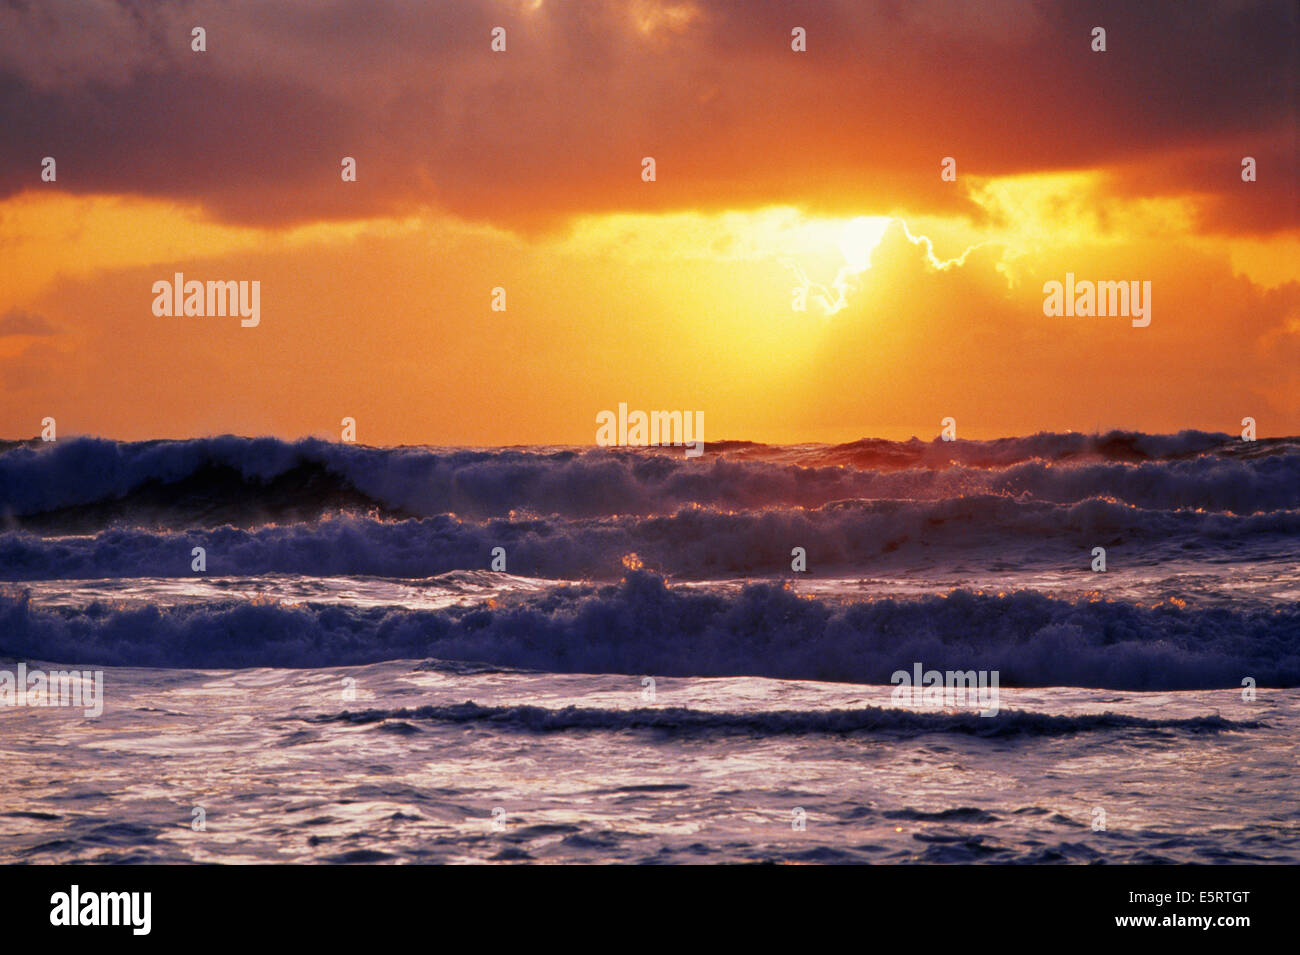 Waves breaking on shore at sunset off the California coast Stock Photo